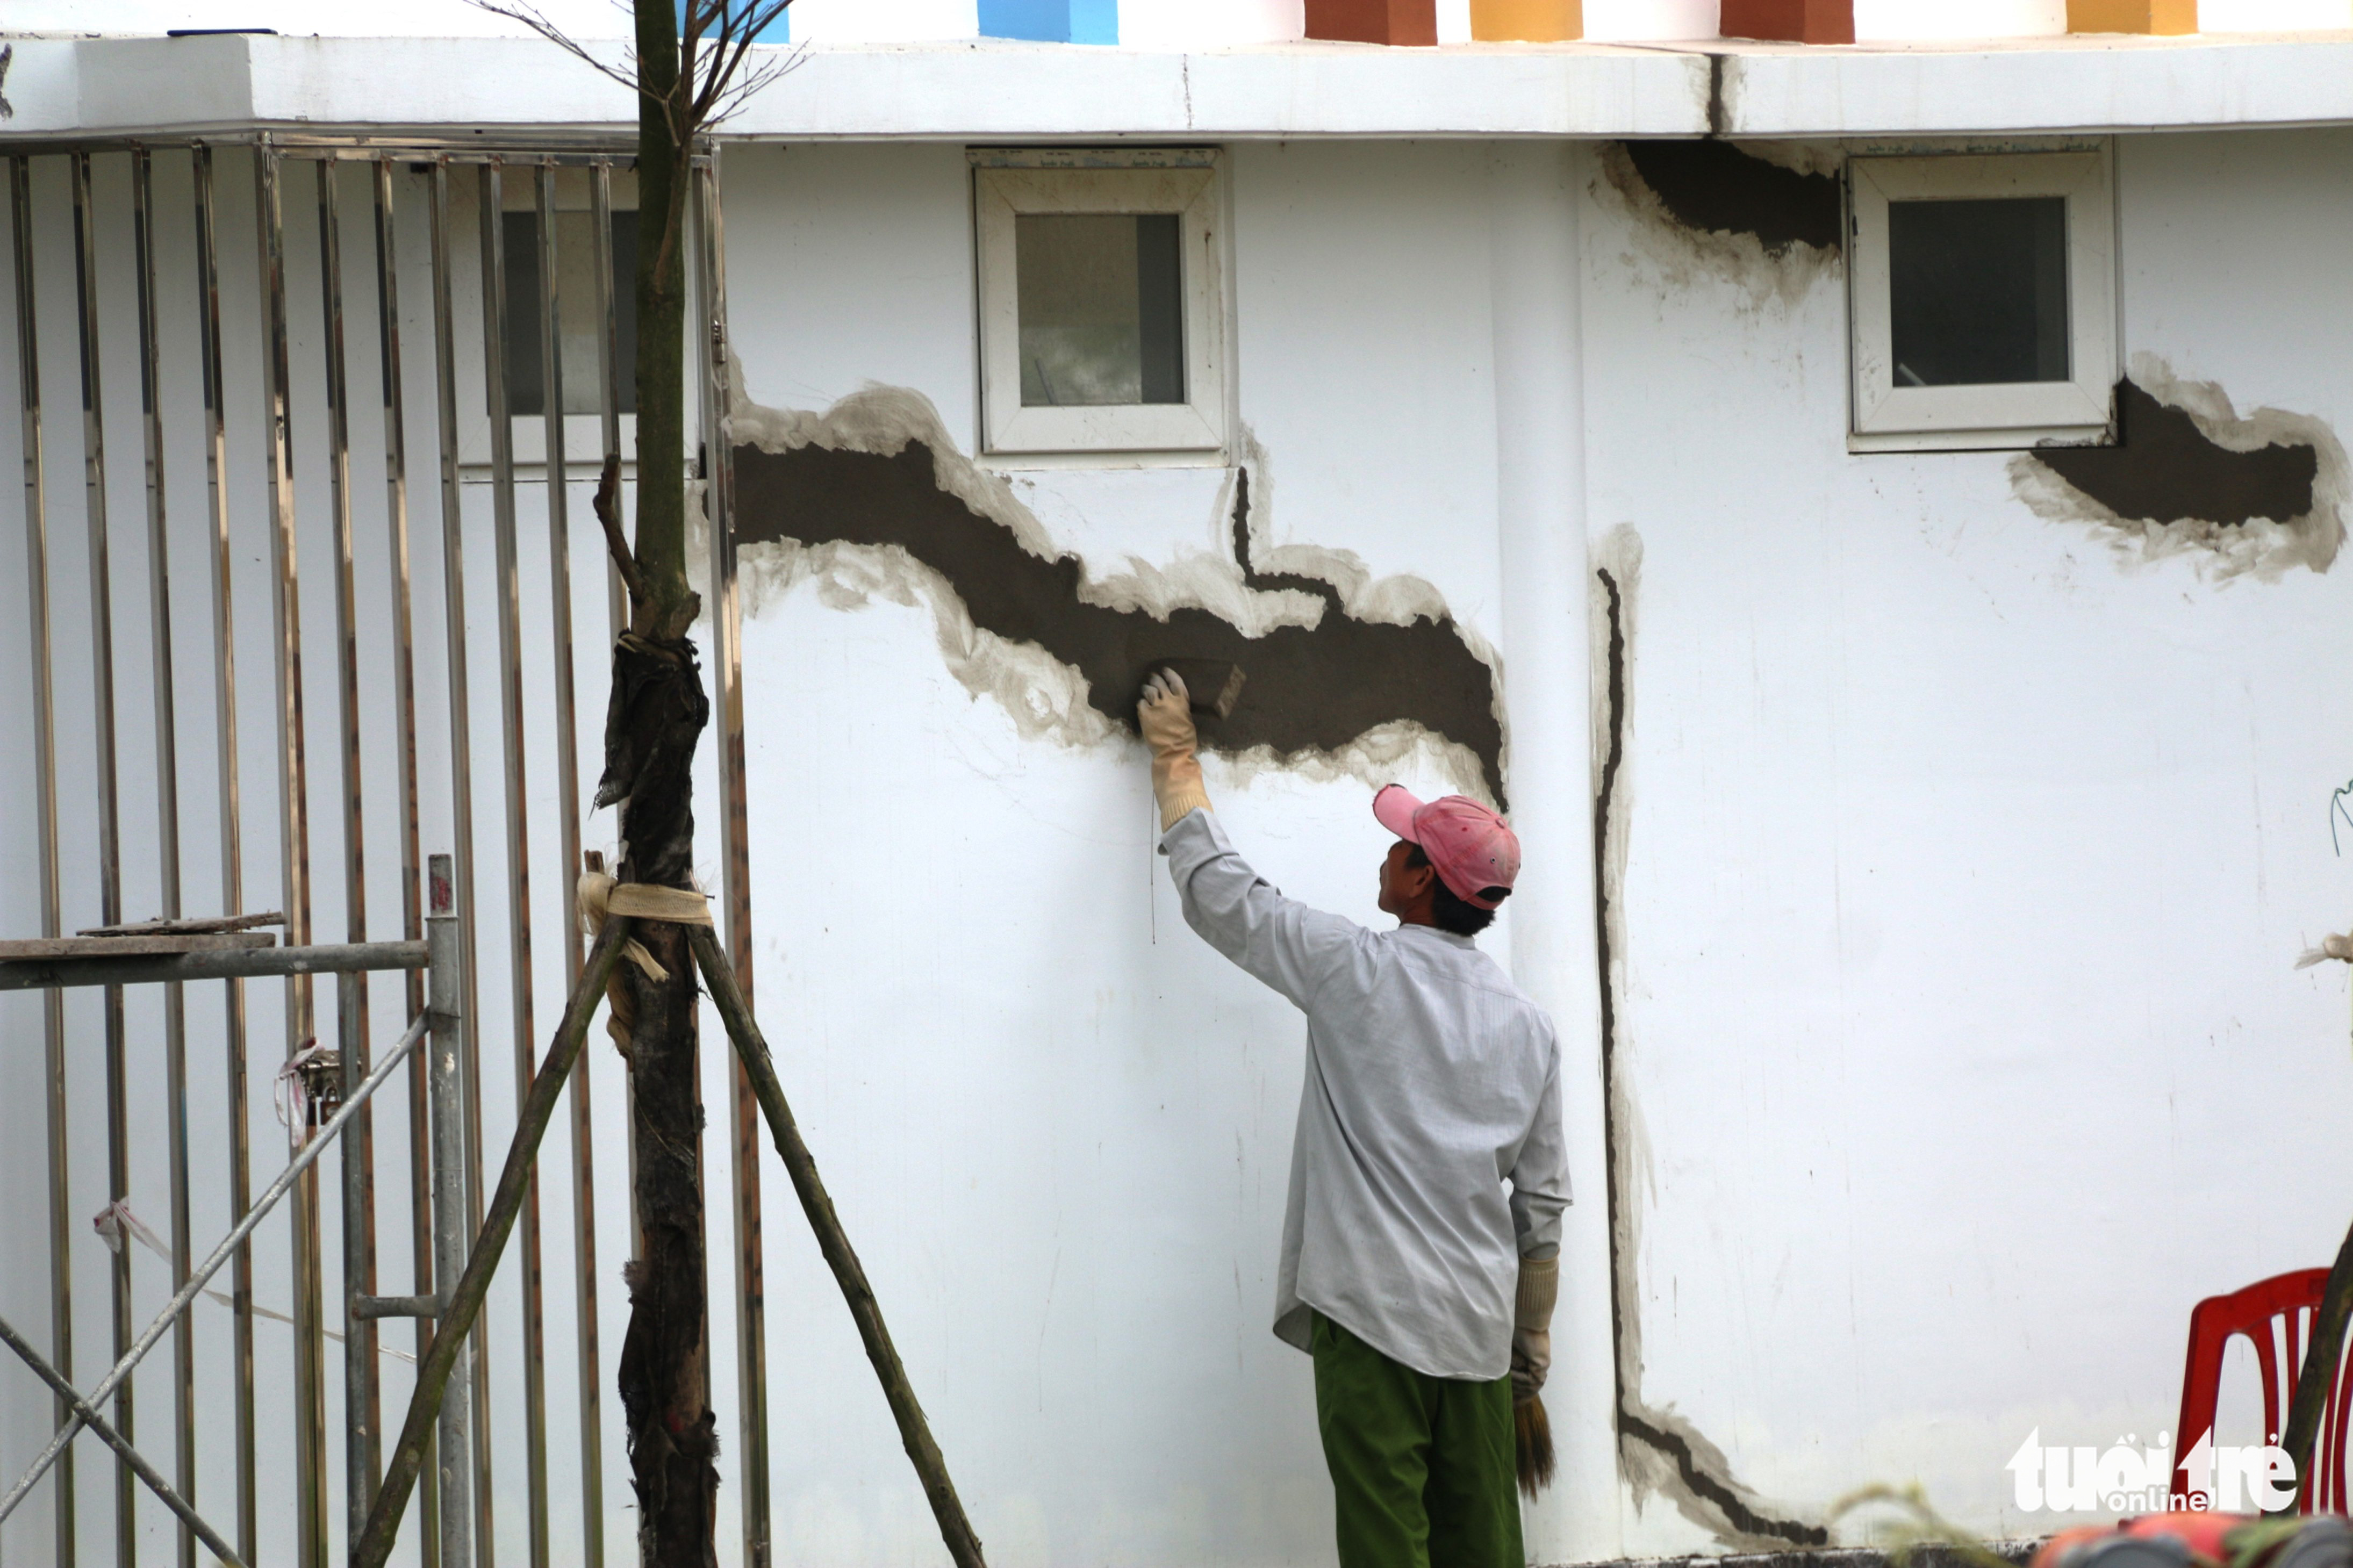 A worker fixes the cracks at Hoang Mai Kindergarten in Thua Thien-Hue Province, Vietnam. Photo: Nhat Linh / Tuoi Tre